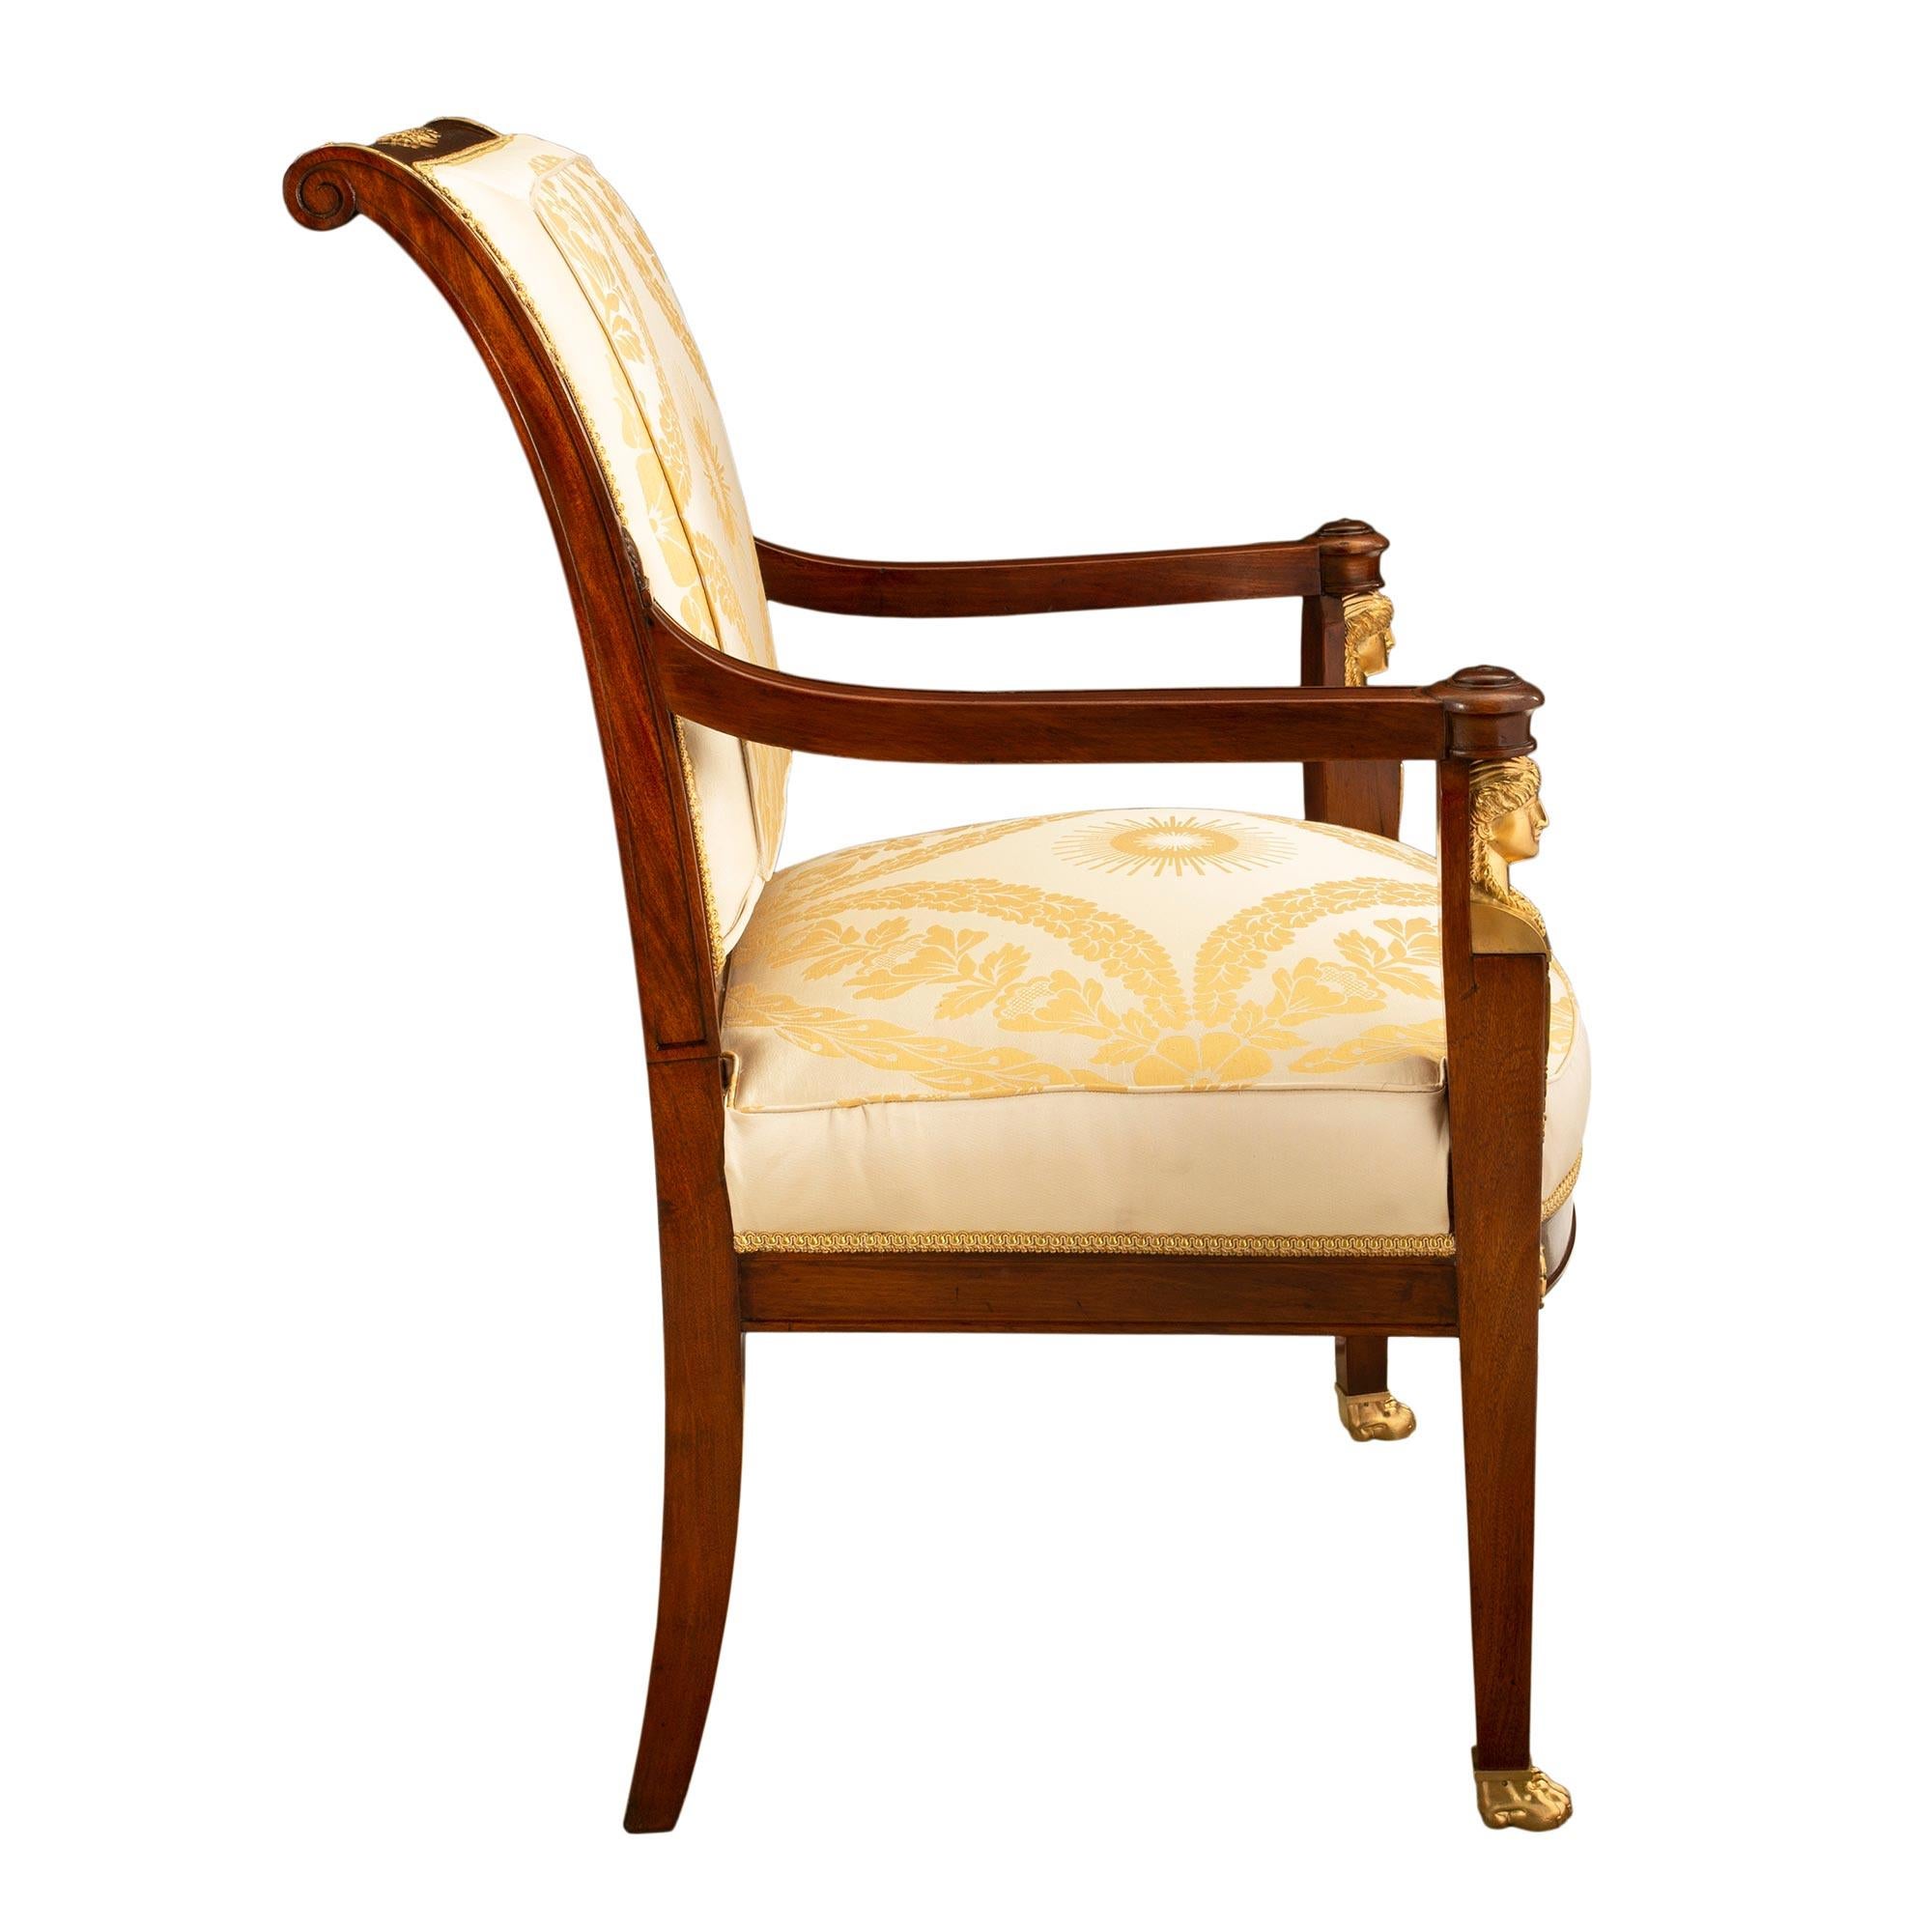 Pair of French Mid 19th Century Empire St. Mahogany and Ormolu Mounted Armchair In Good Condition For Sale In West Palm Beach, FL